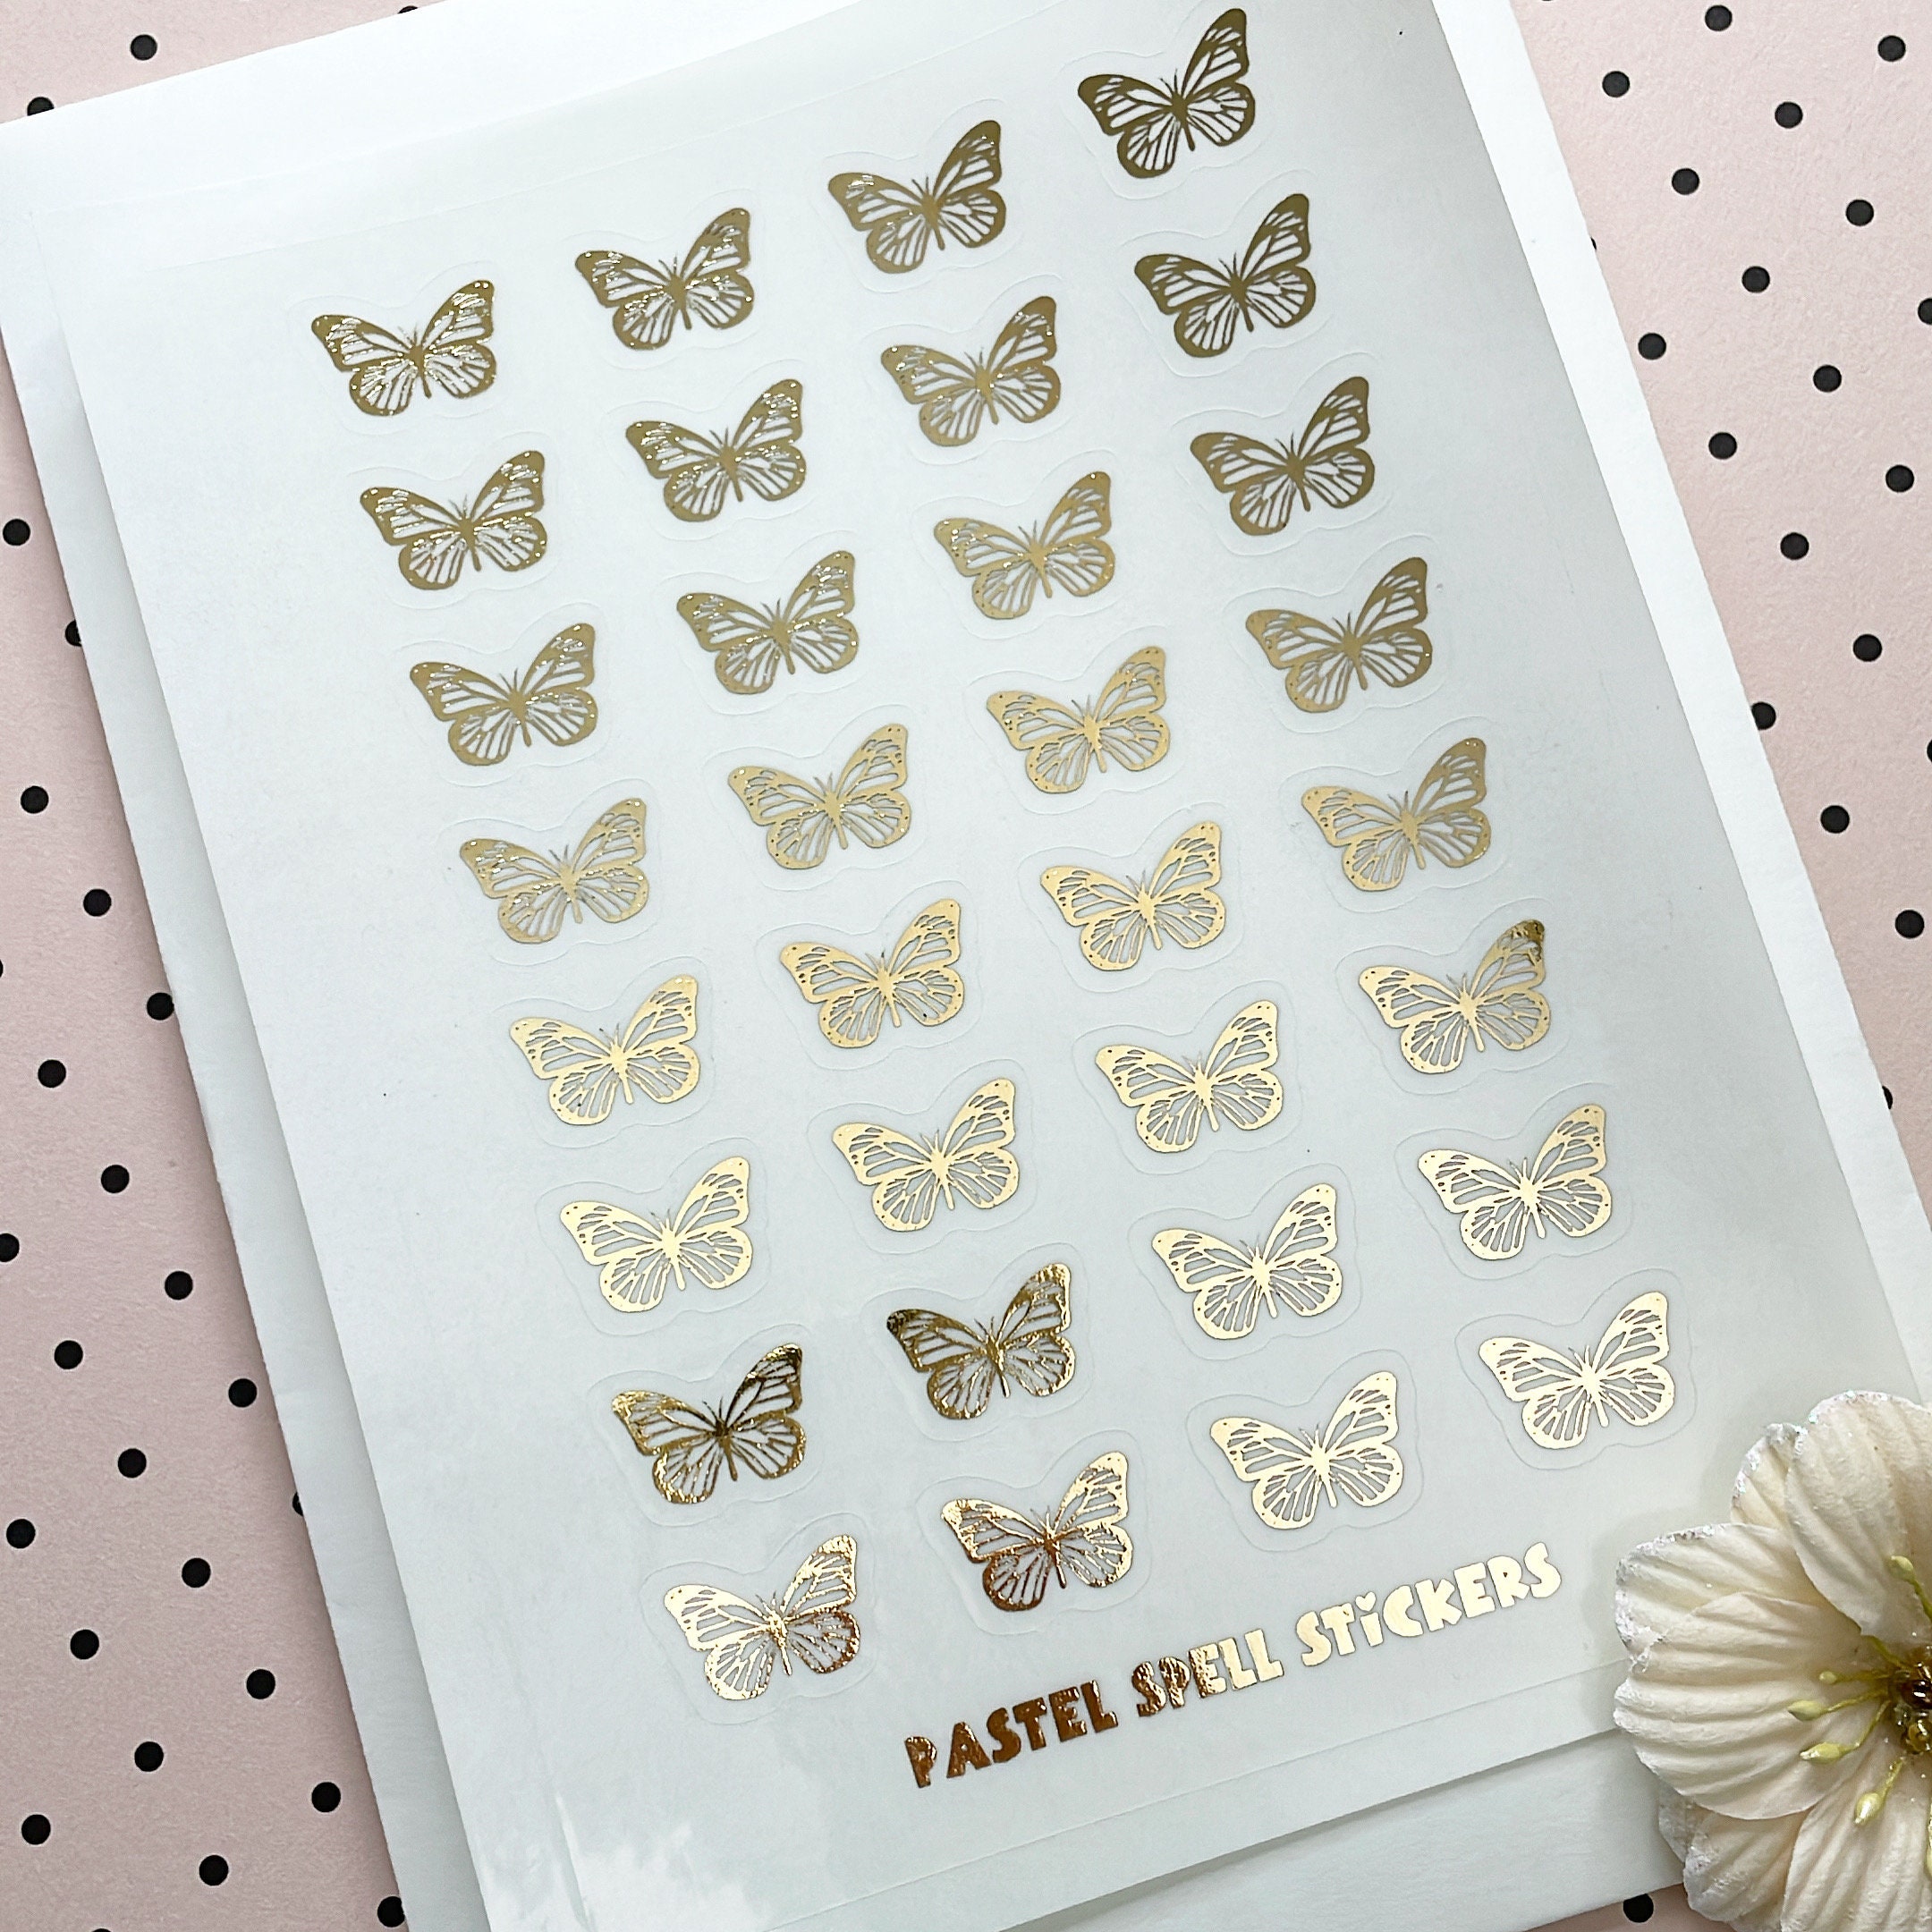 Digital Planner Gold Stickers Graphic by Pencil Artsy · Creative